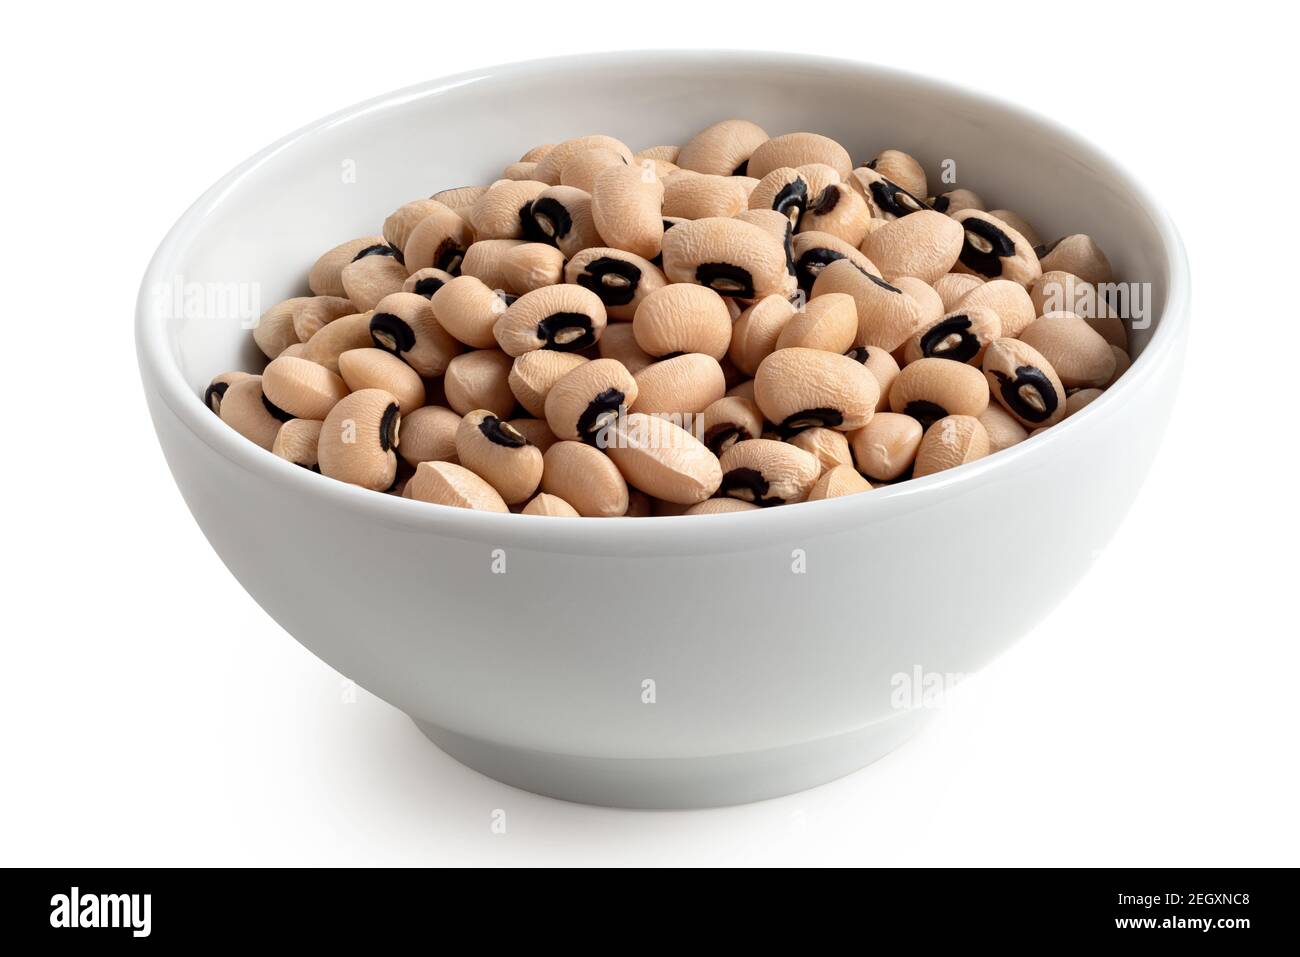 Uncooked black-eyed beans in a white ceramic bowl isolated on white. Stock Photo